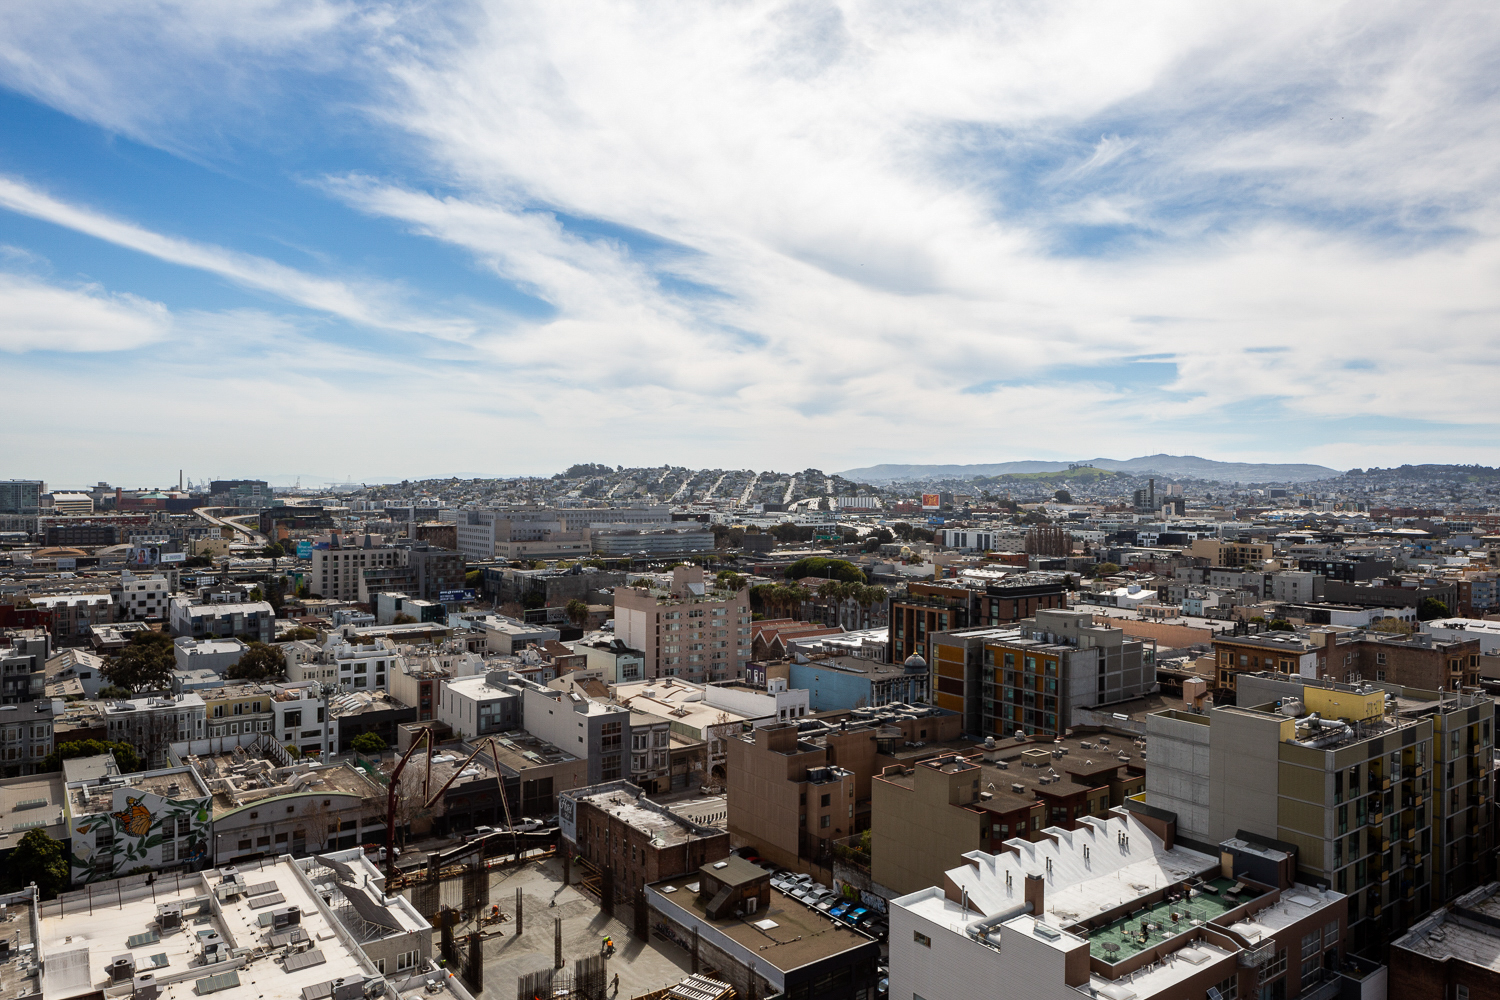 View of San Francisco looking south from The George, image by Andrew Campbell Nelson